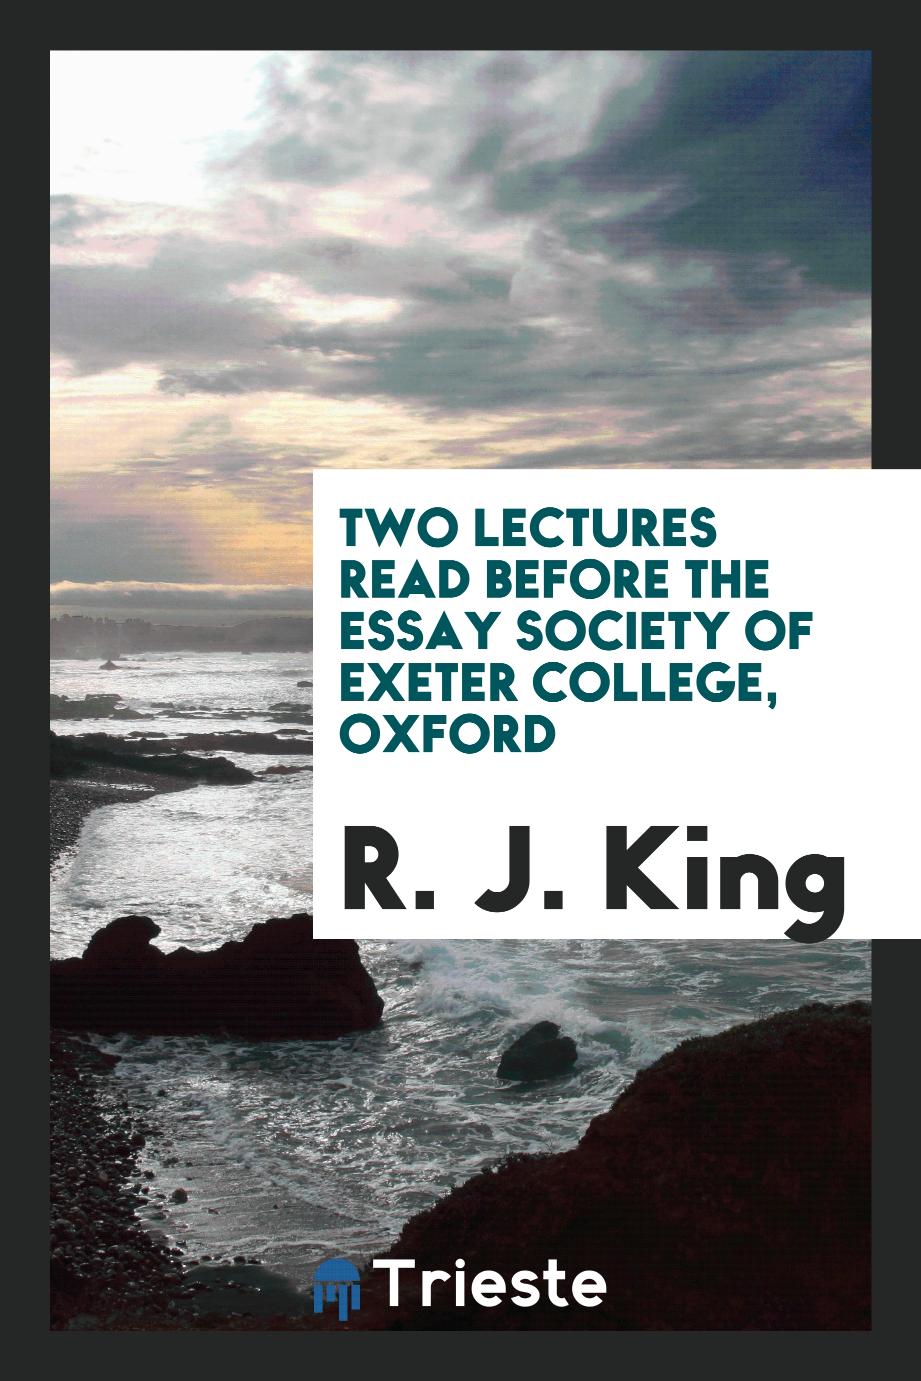 Two Lectures Read before the Essay Society of Exeter College, Oxford